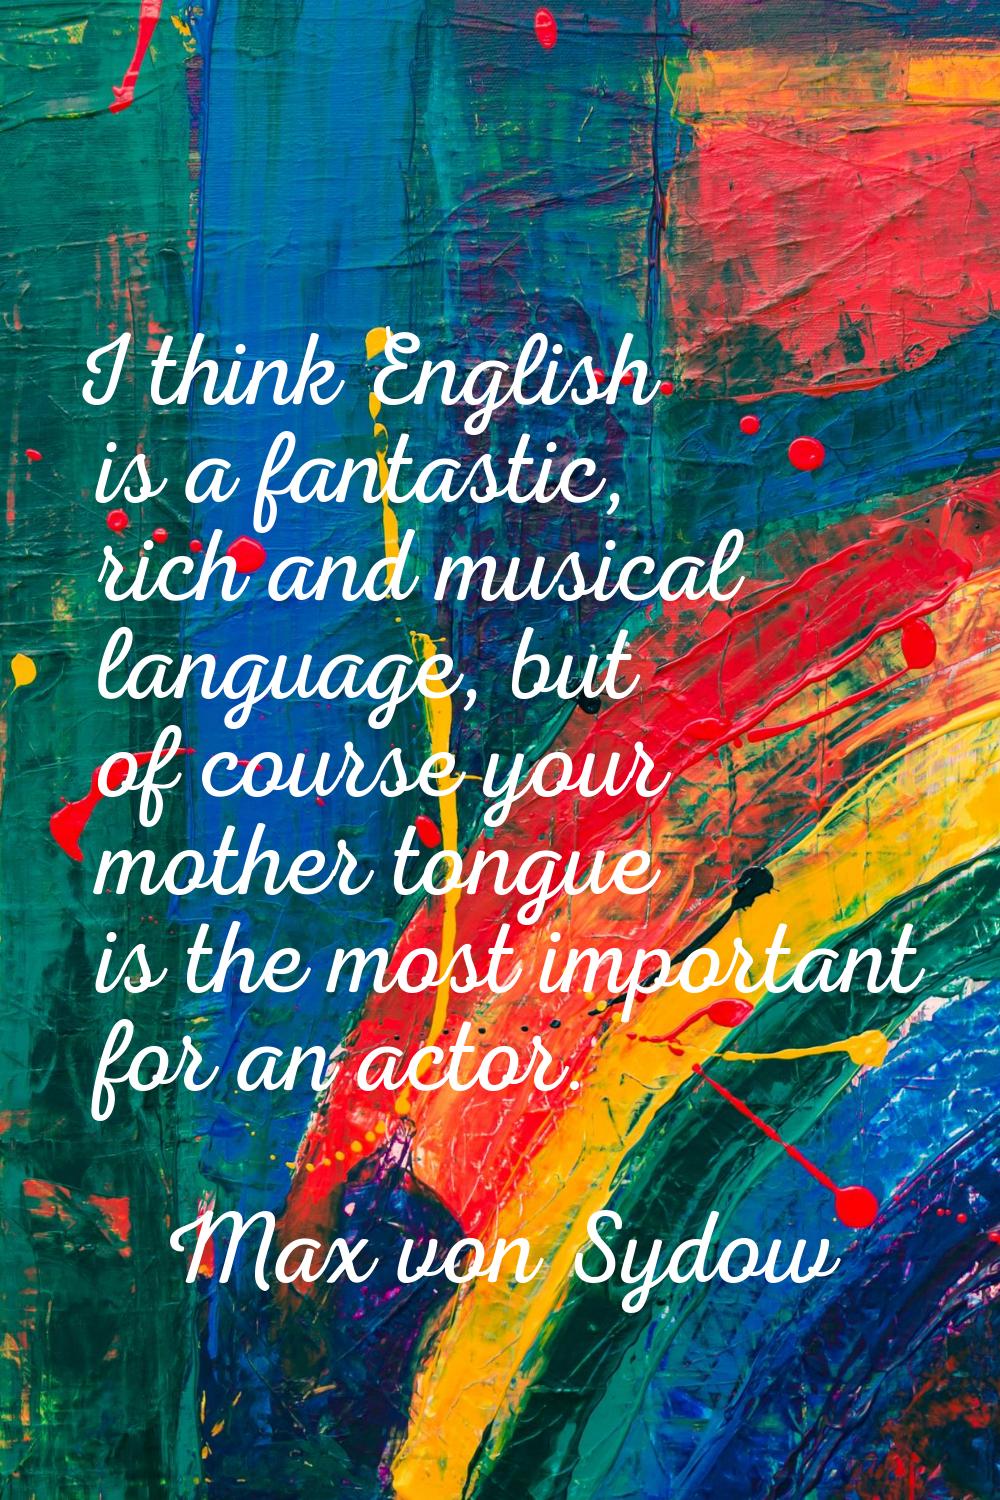 I think English is a fantastic, rich and musical language, but of course your mother tongue is the 